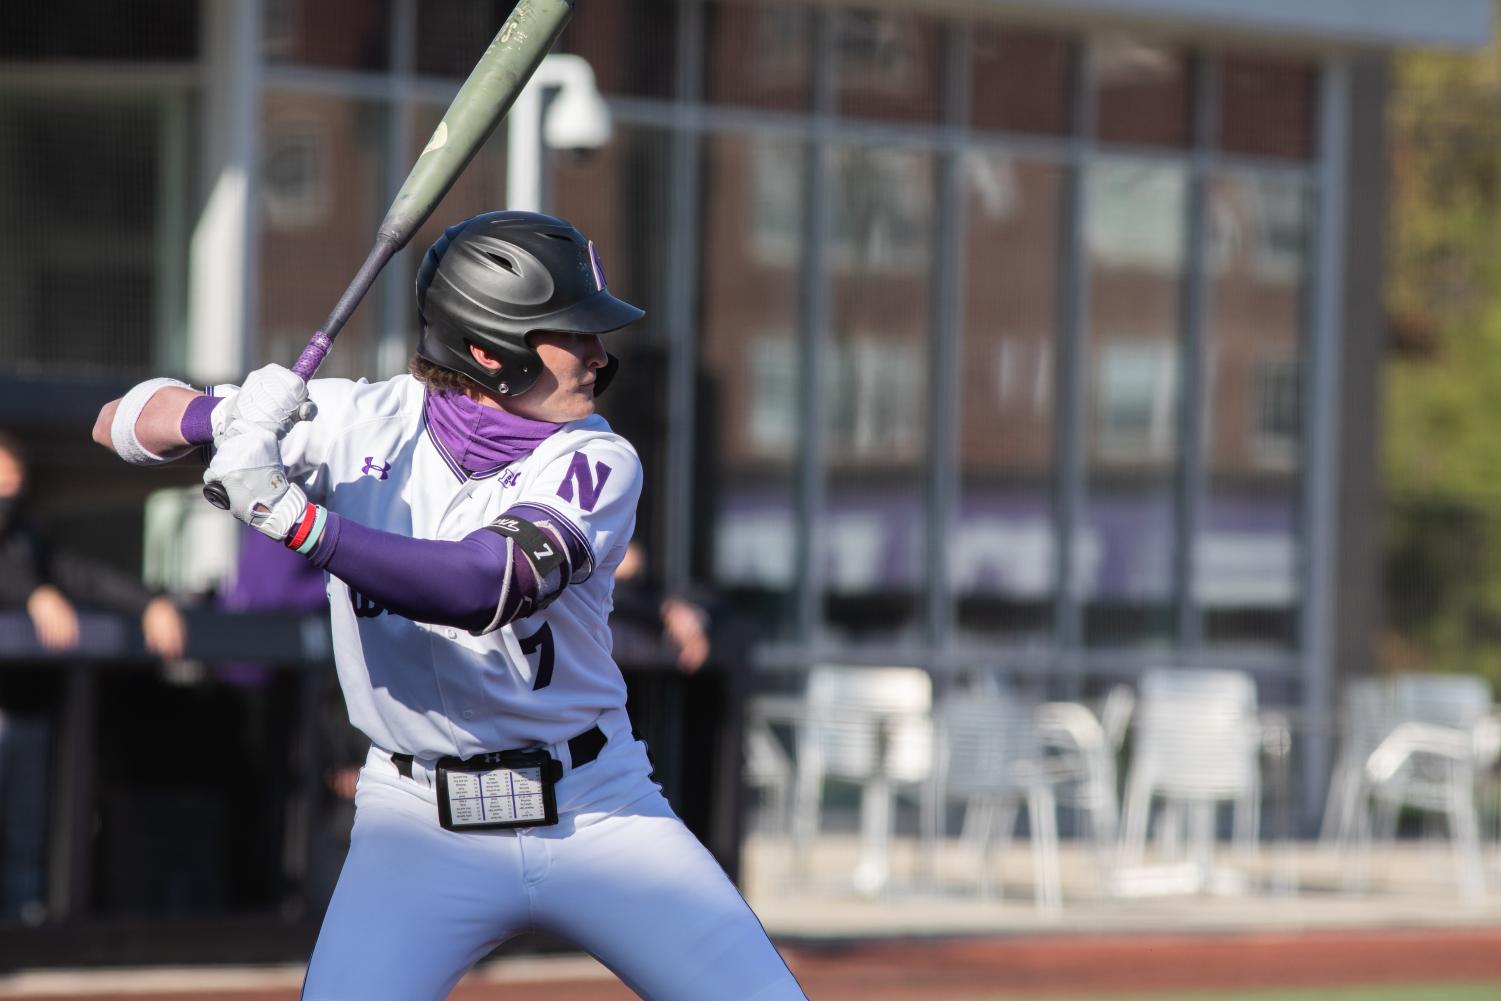 Northwestern+player+readies+for+incoming+pitch.